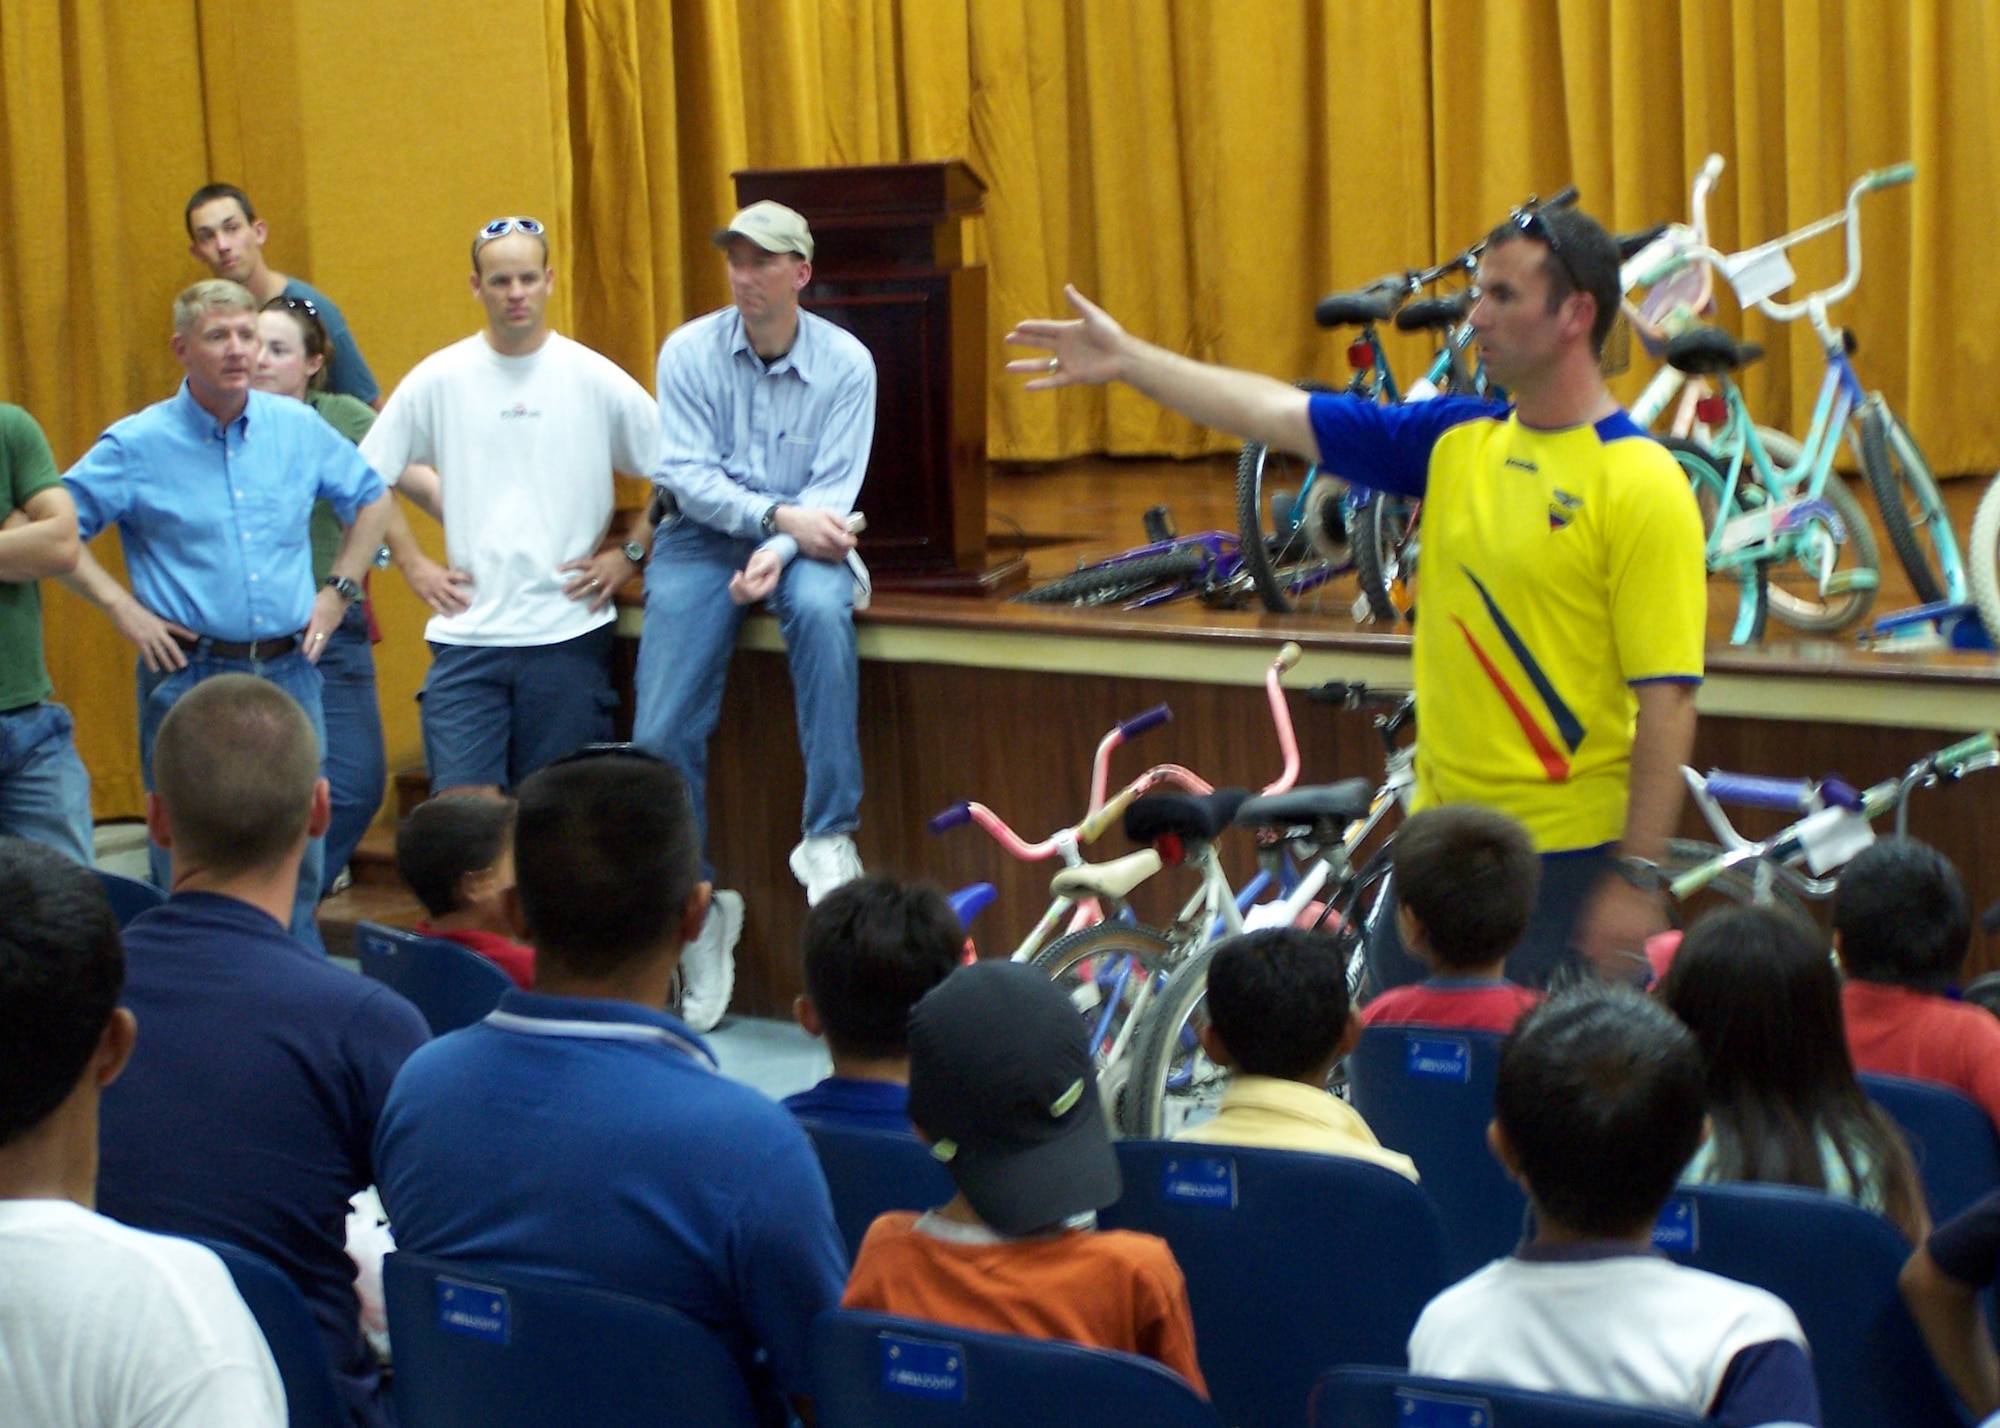 Maj. Chris Buckley, 478th Expeditionary Operations Squadron and lead volunteer for the English class at the Albergue School in Manta, Ecuador, tells the students the process for retrieving their donated bicycles.  (U.S. Air Force official photo)